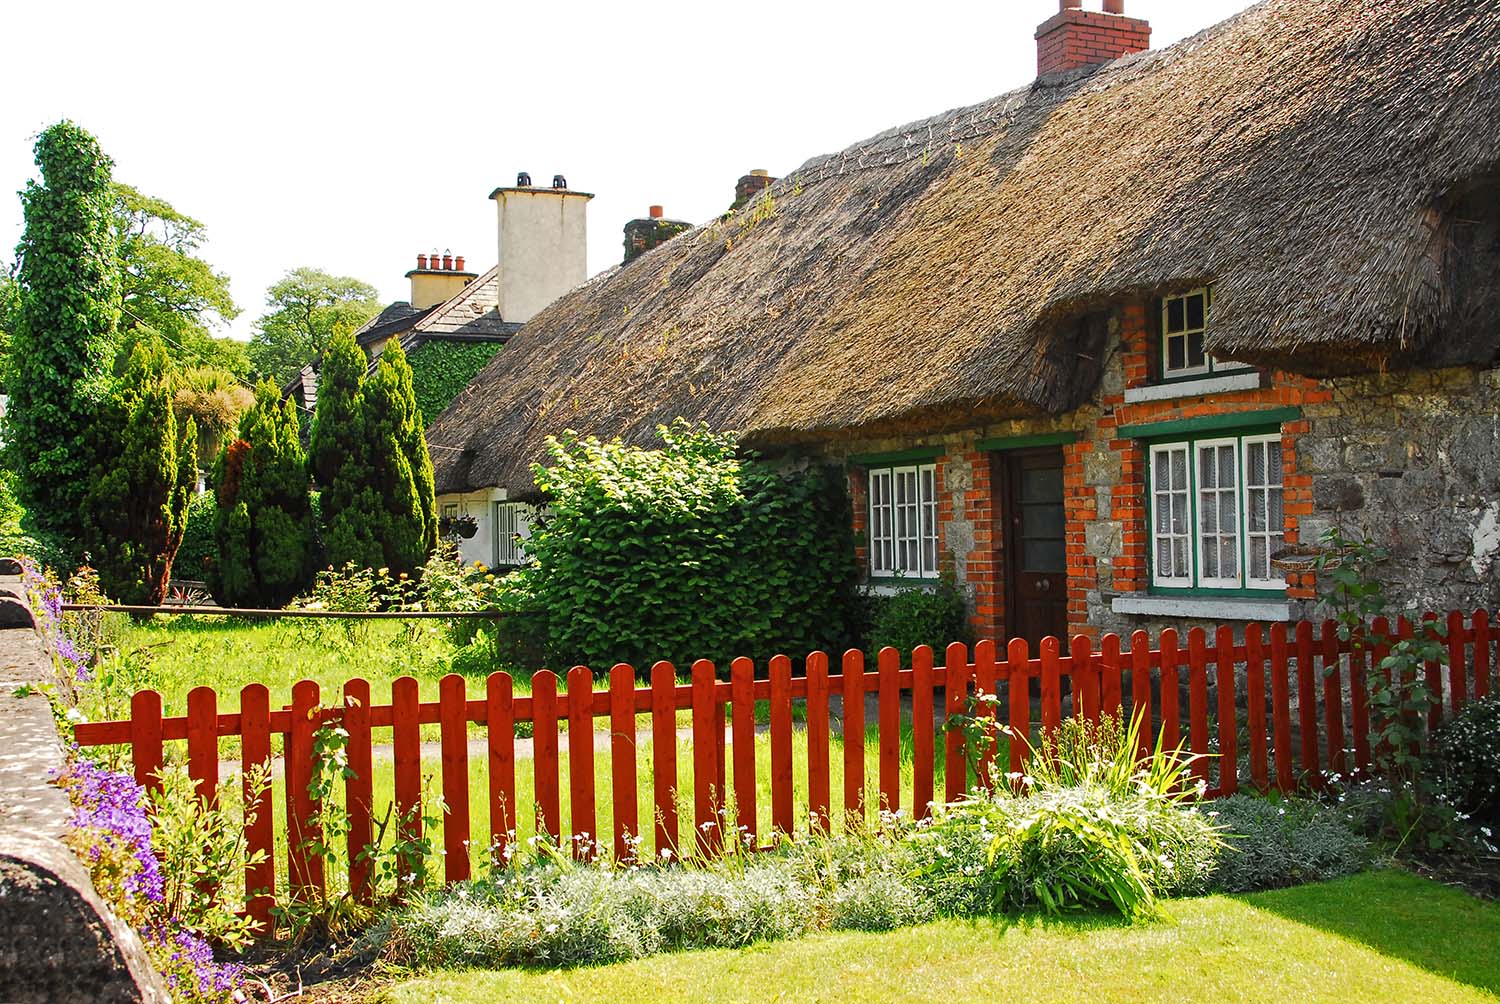 Thatched-Roof_House_Adare_County_Limerick_Ireland.jpg